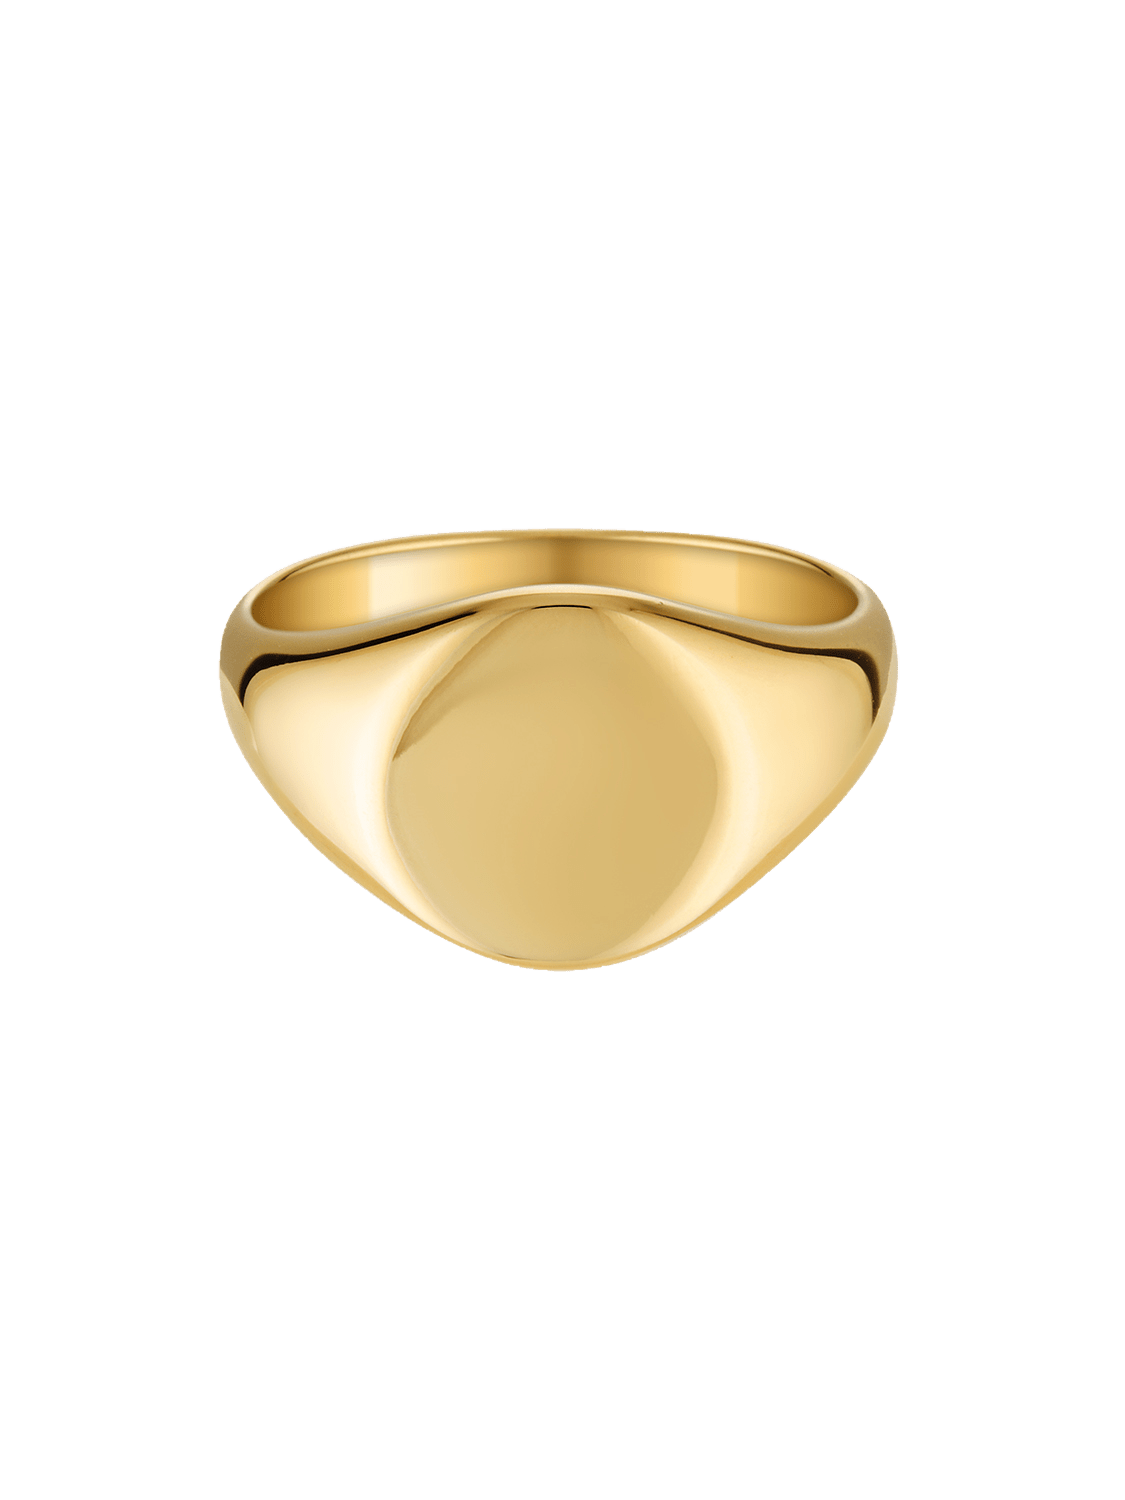 Sun signet ring, classic and traditional signet ring